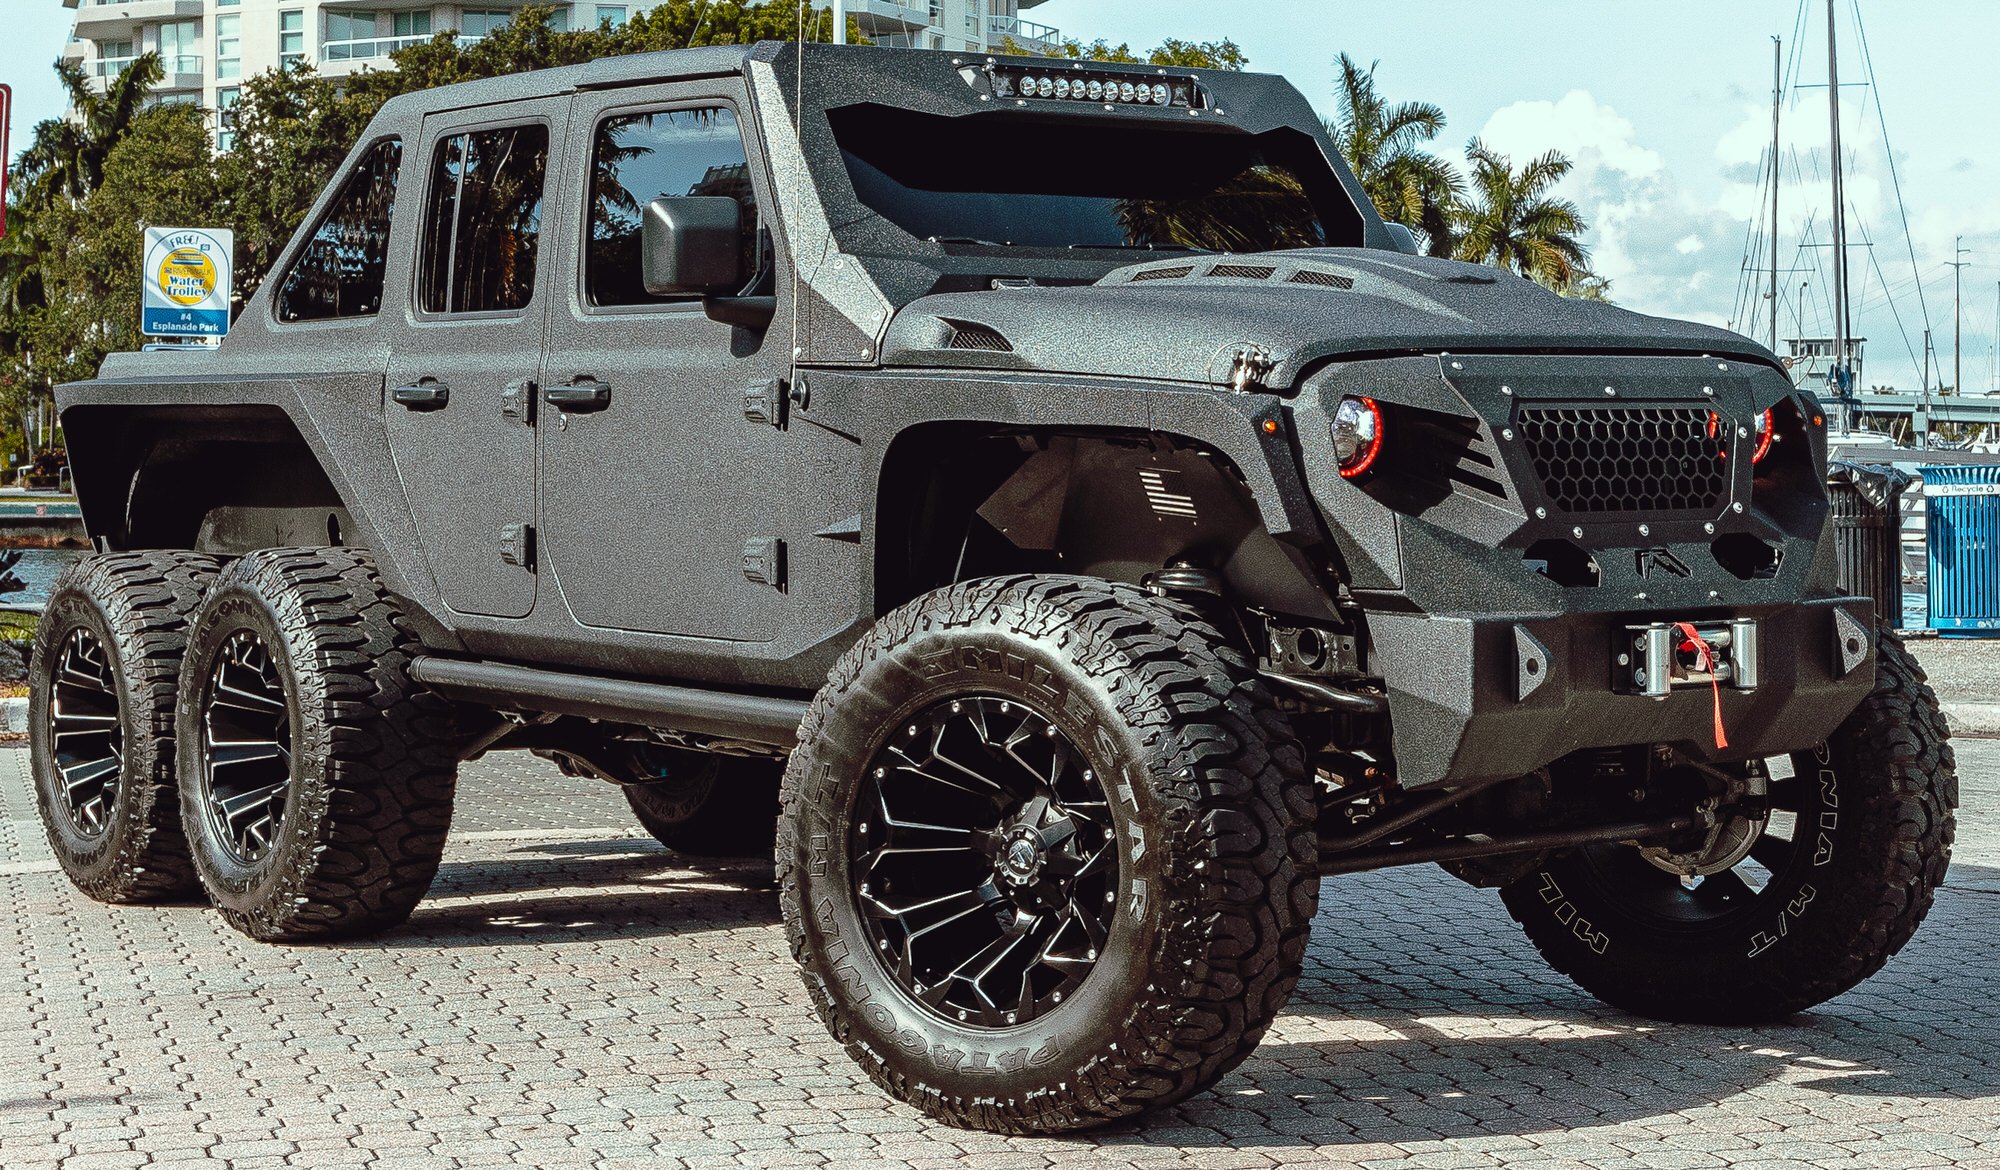 lamtac encounter muscle monster soflo jeeps builds a x wheels with hp engine block costing more than thousand dollars 64d5dfaa7774f Encounter "muscle Monster" Soflo Jeeps Builds A 6x6 6 Wheels With 700 Hp Engine Block Costing More Than 400 Thousand Dollars